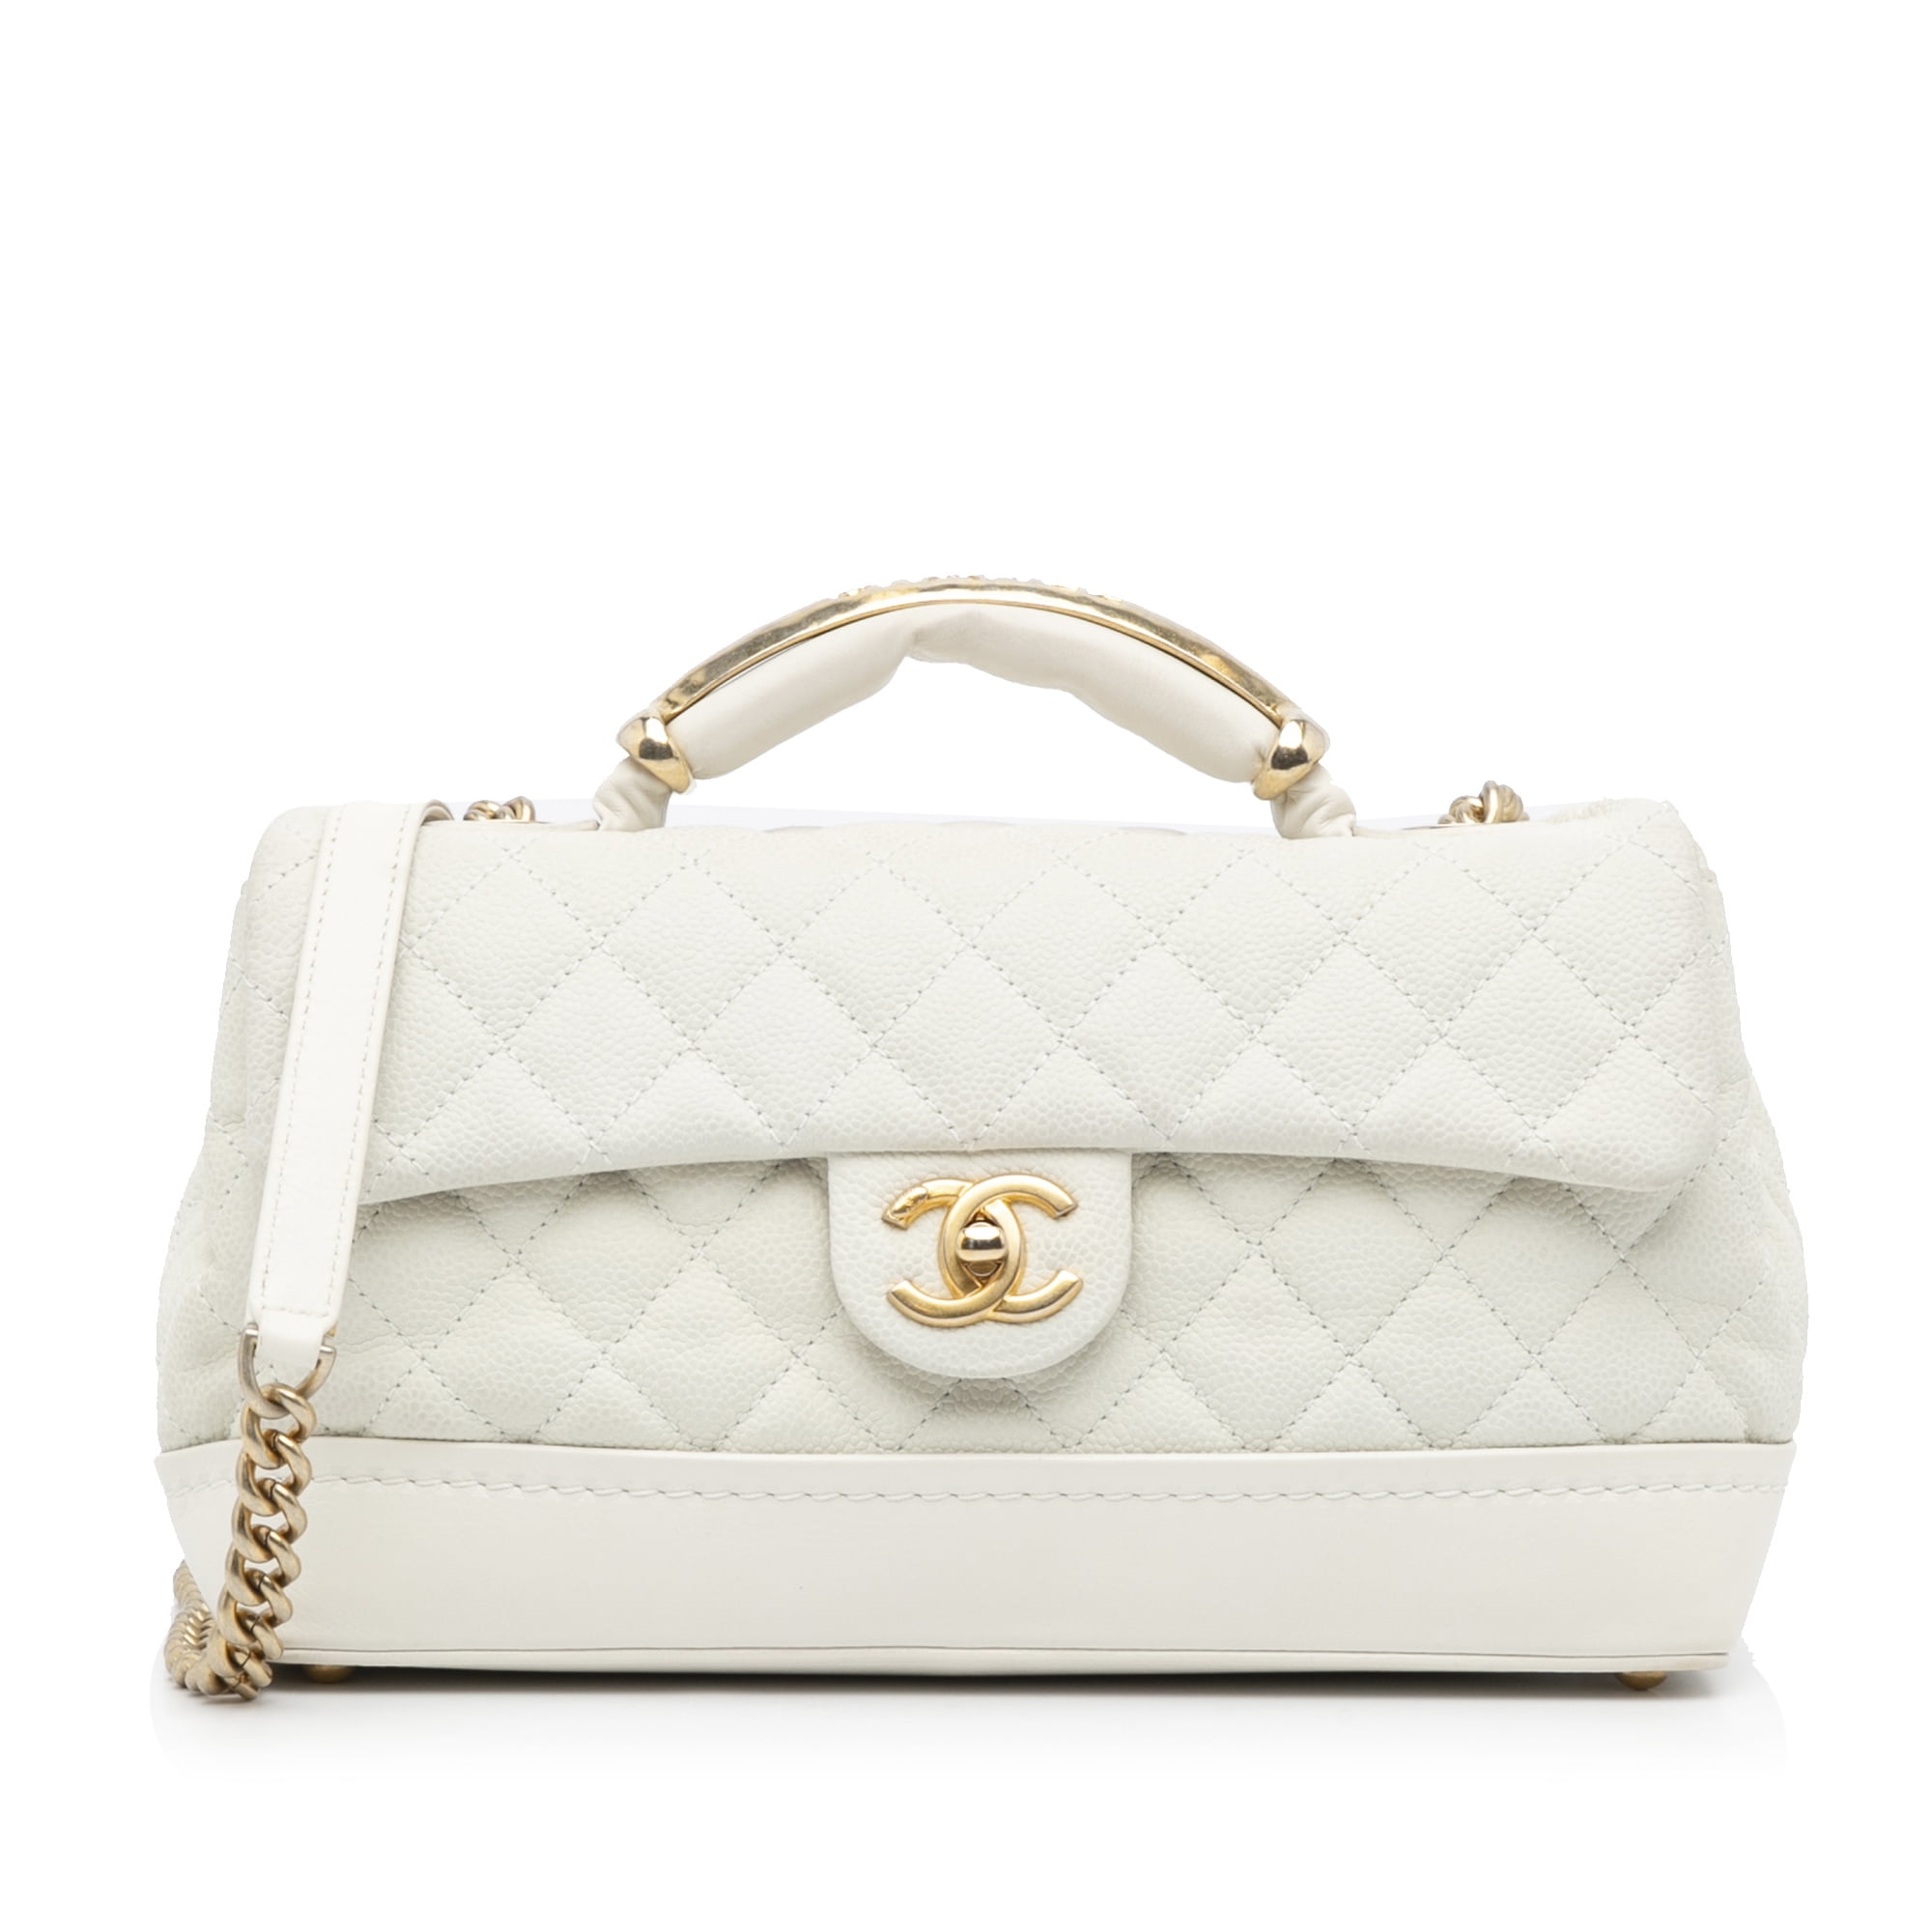 used Pre-owned Authenticated Chanel Medium Globe Trotter Flap Bag Caviar Leather White Satchel Unisex (New with Defects), Adult Unisex, Size: Small